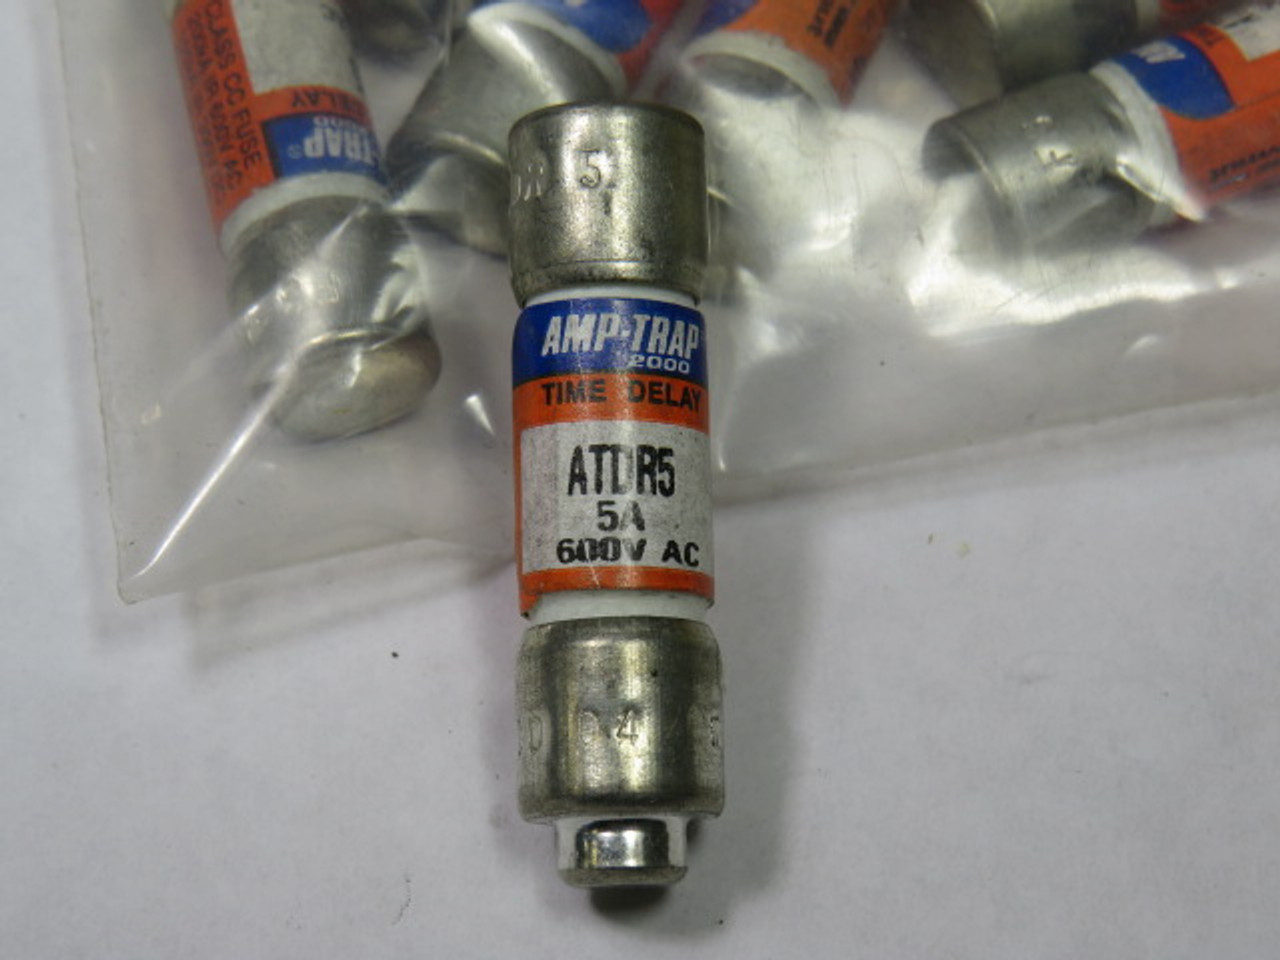 Amp-Trap ATDR5 Time Delay Fuse 5A 600V Lot of 10 USED